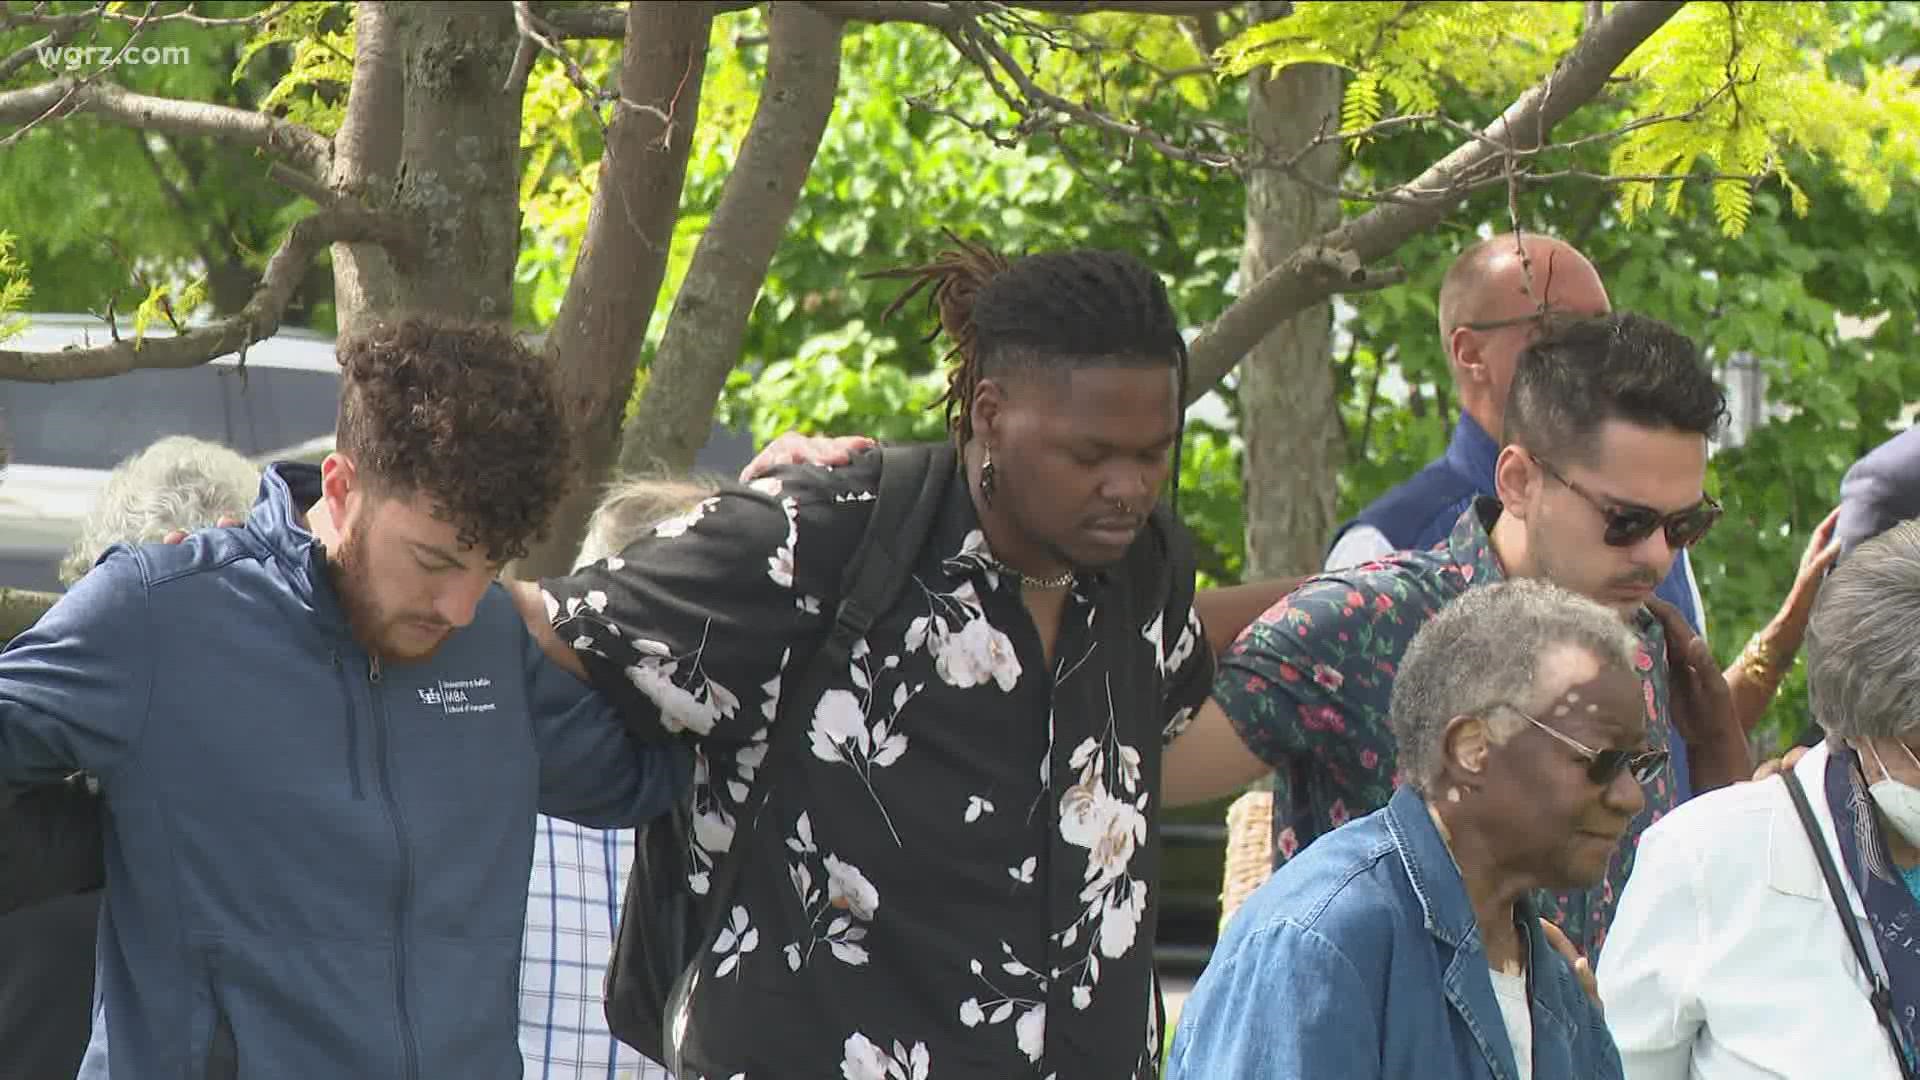 Prayer Vigil Held For The Victims Of Mass Shooting